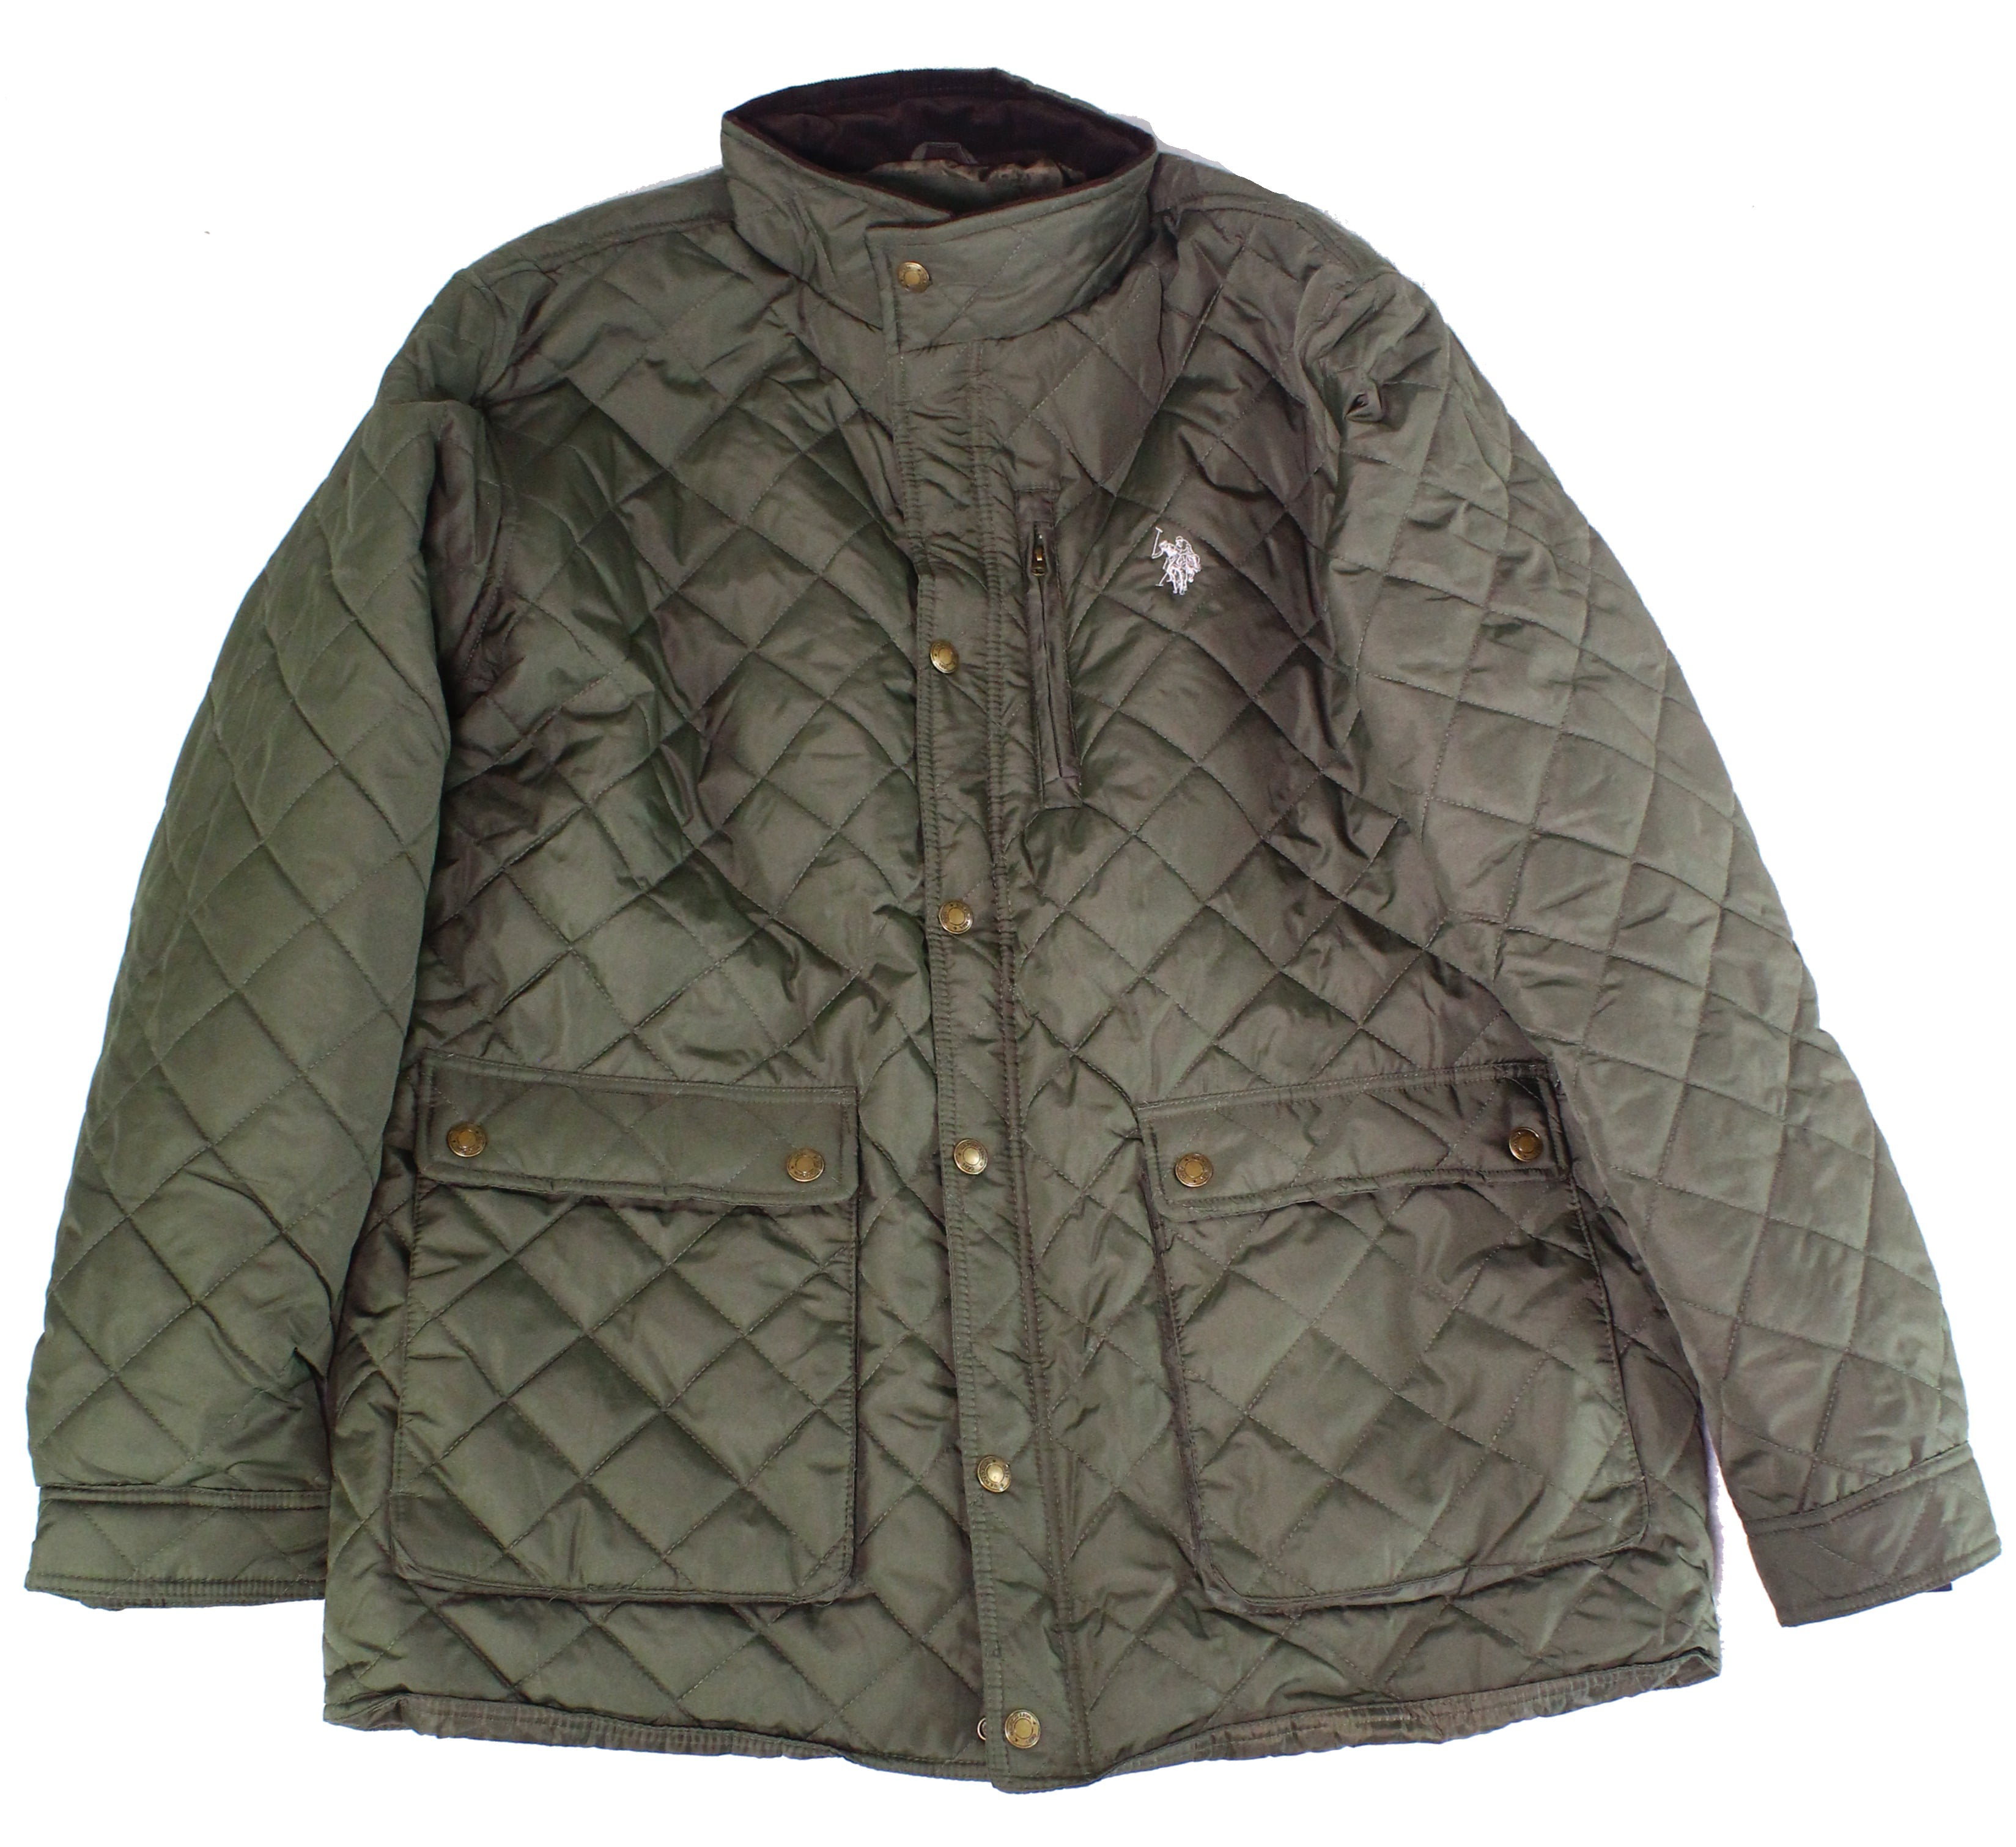 U.S Polo Assn Coats & Jackets - Mens Jacket Quilted Full-Zip Button ...